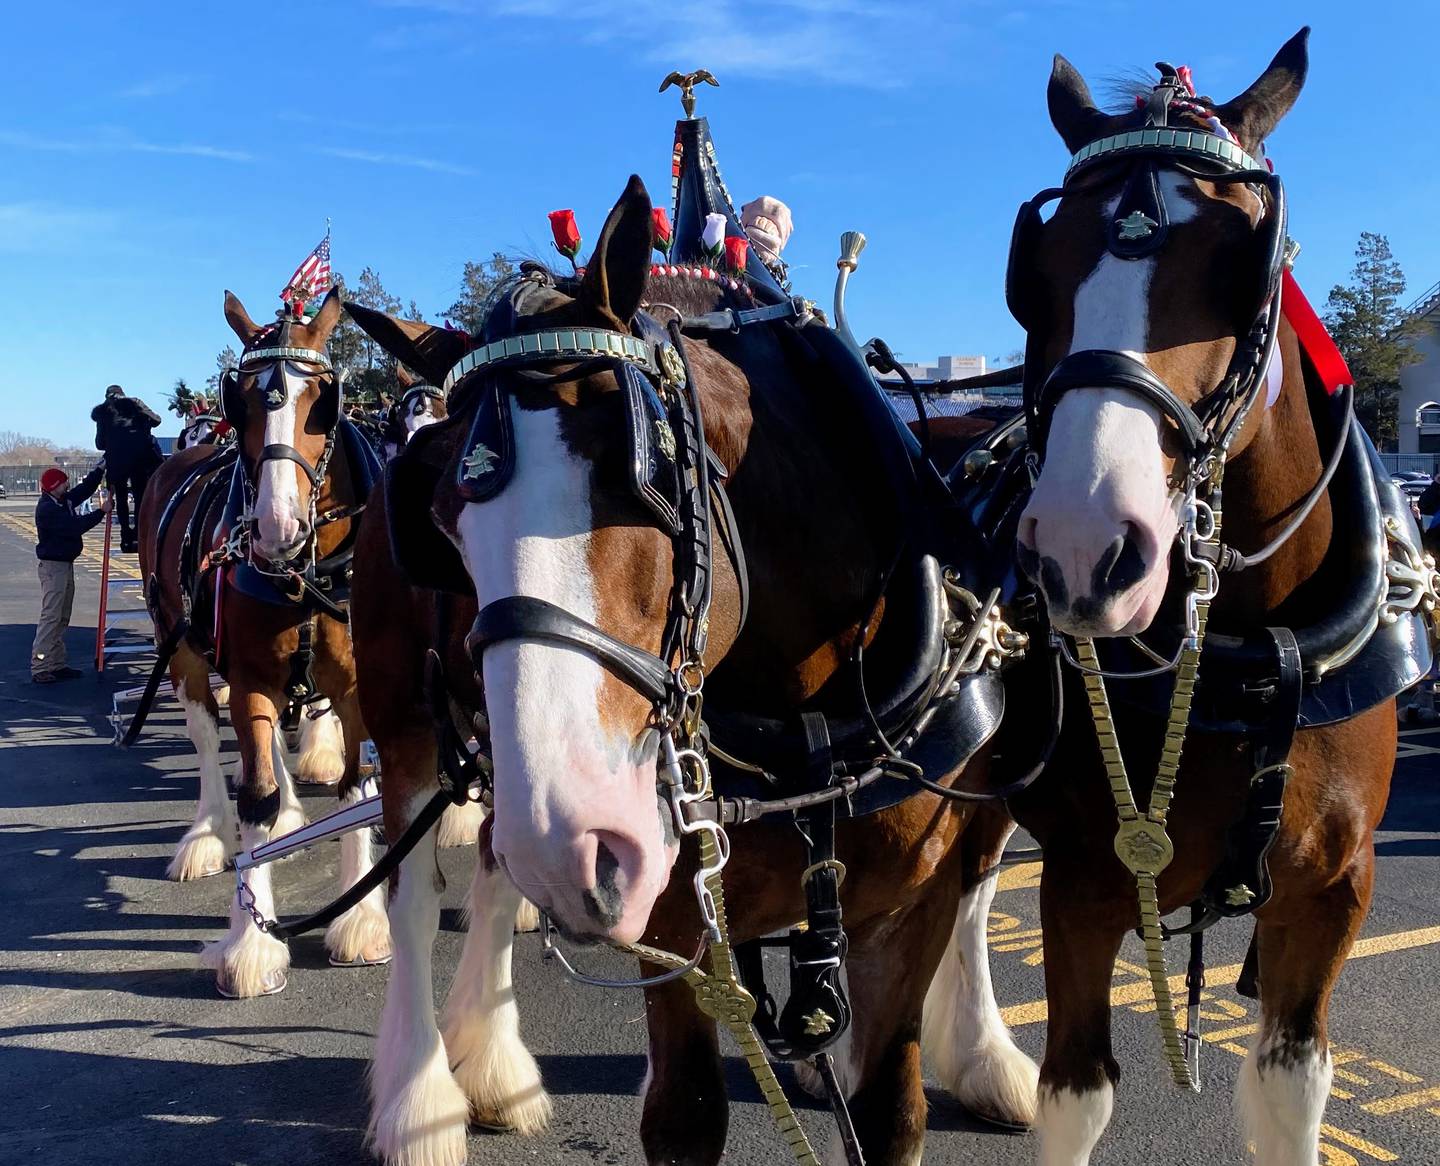 The Budweiser Clydesdales will be in Annapolis Tuesday and Wednesday for the Military Bowl.